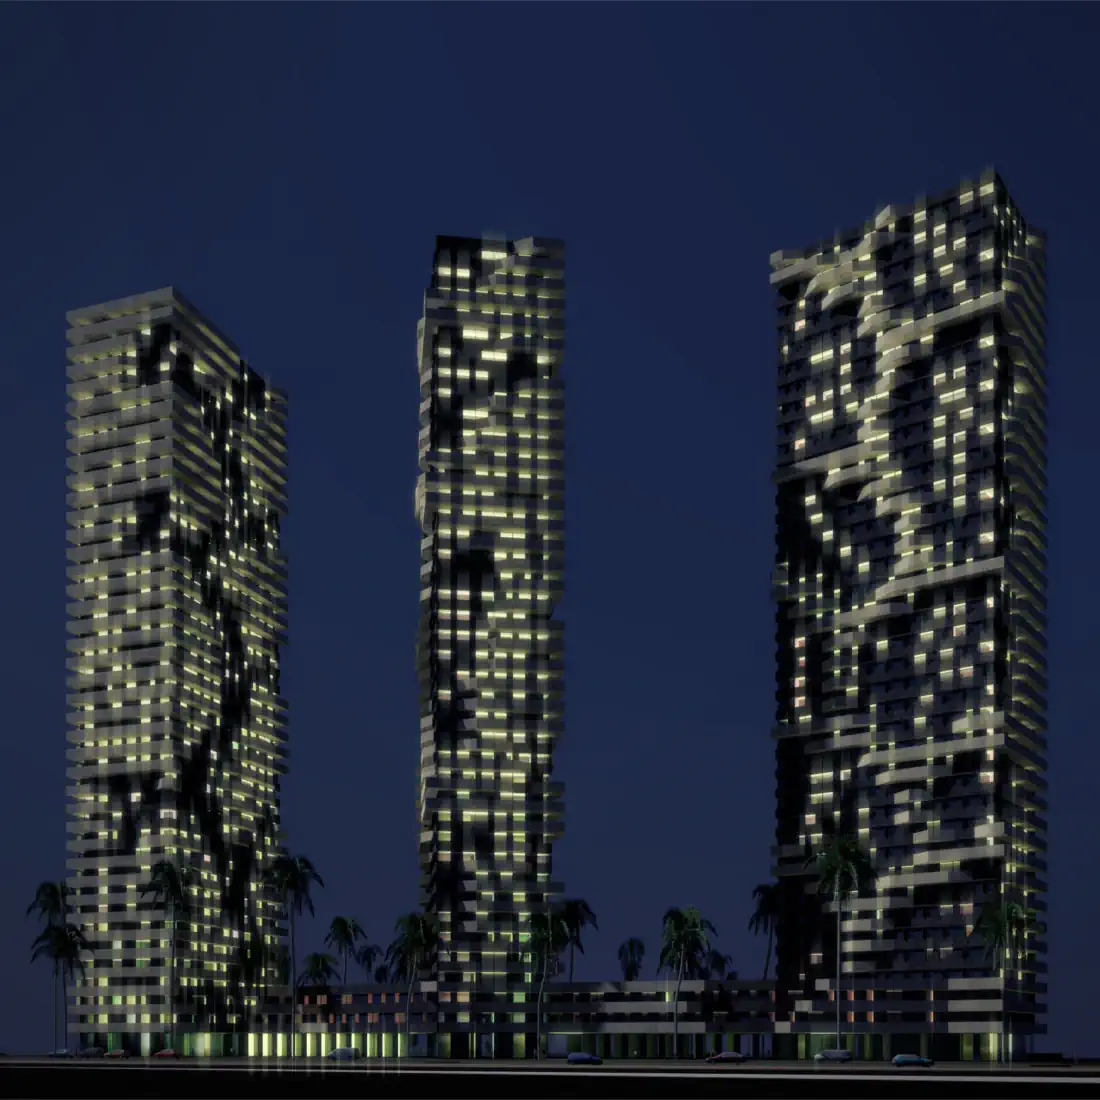 Night perspective of the Residential towers and shopping center